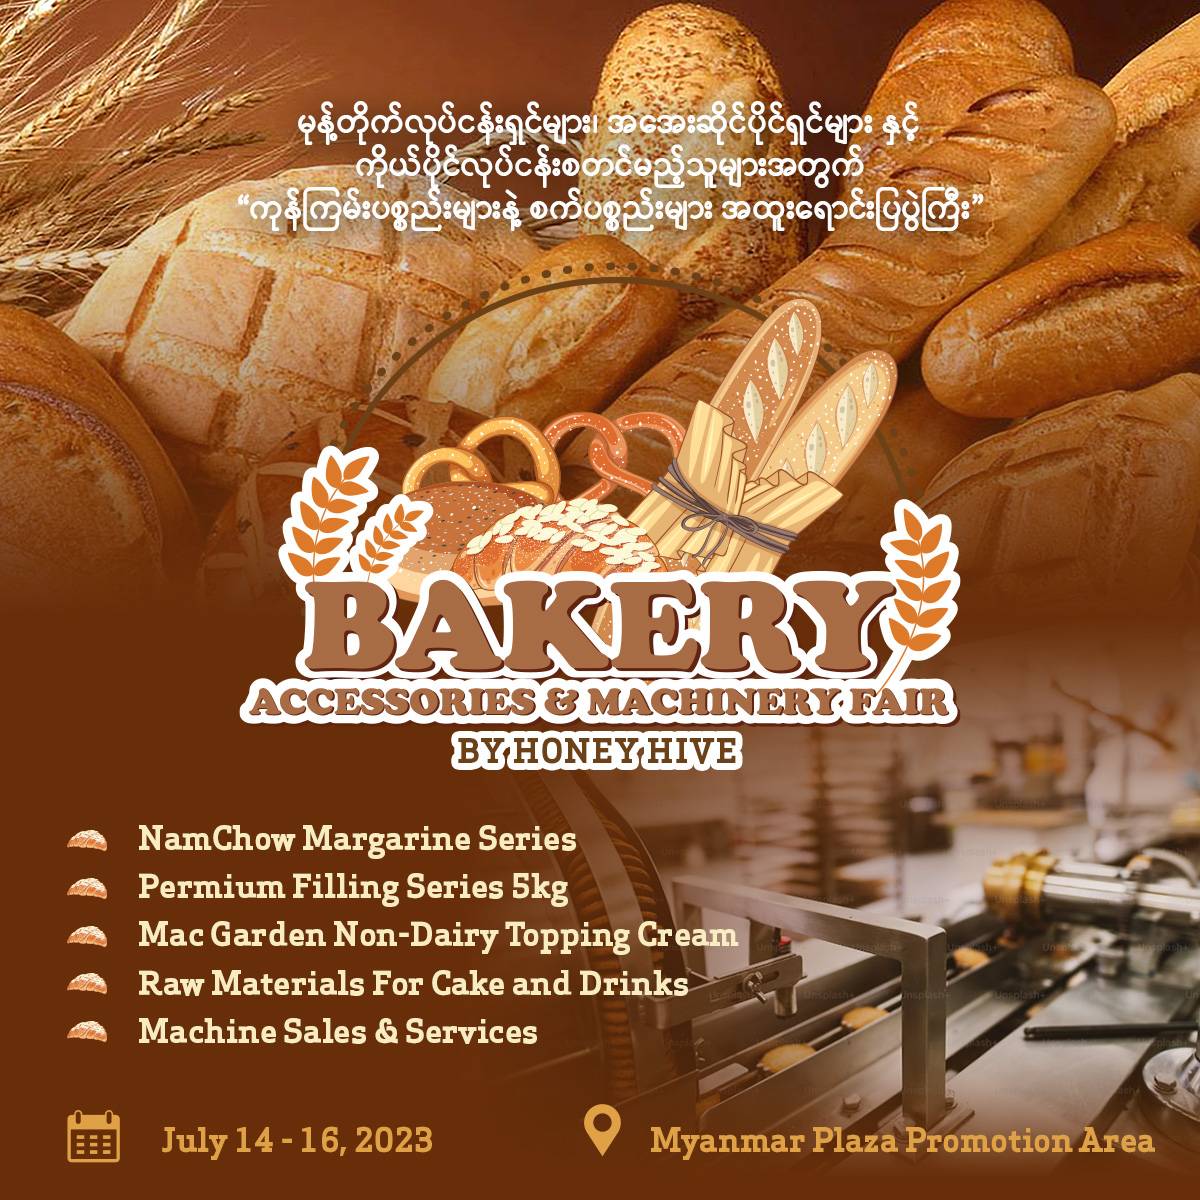 Bakery Accessories And Machinery Fair